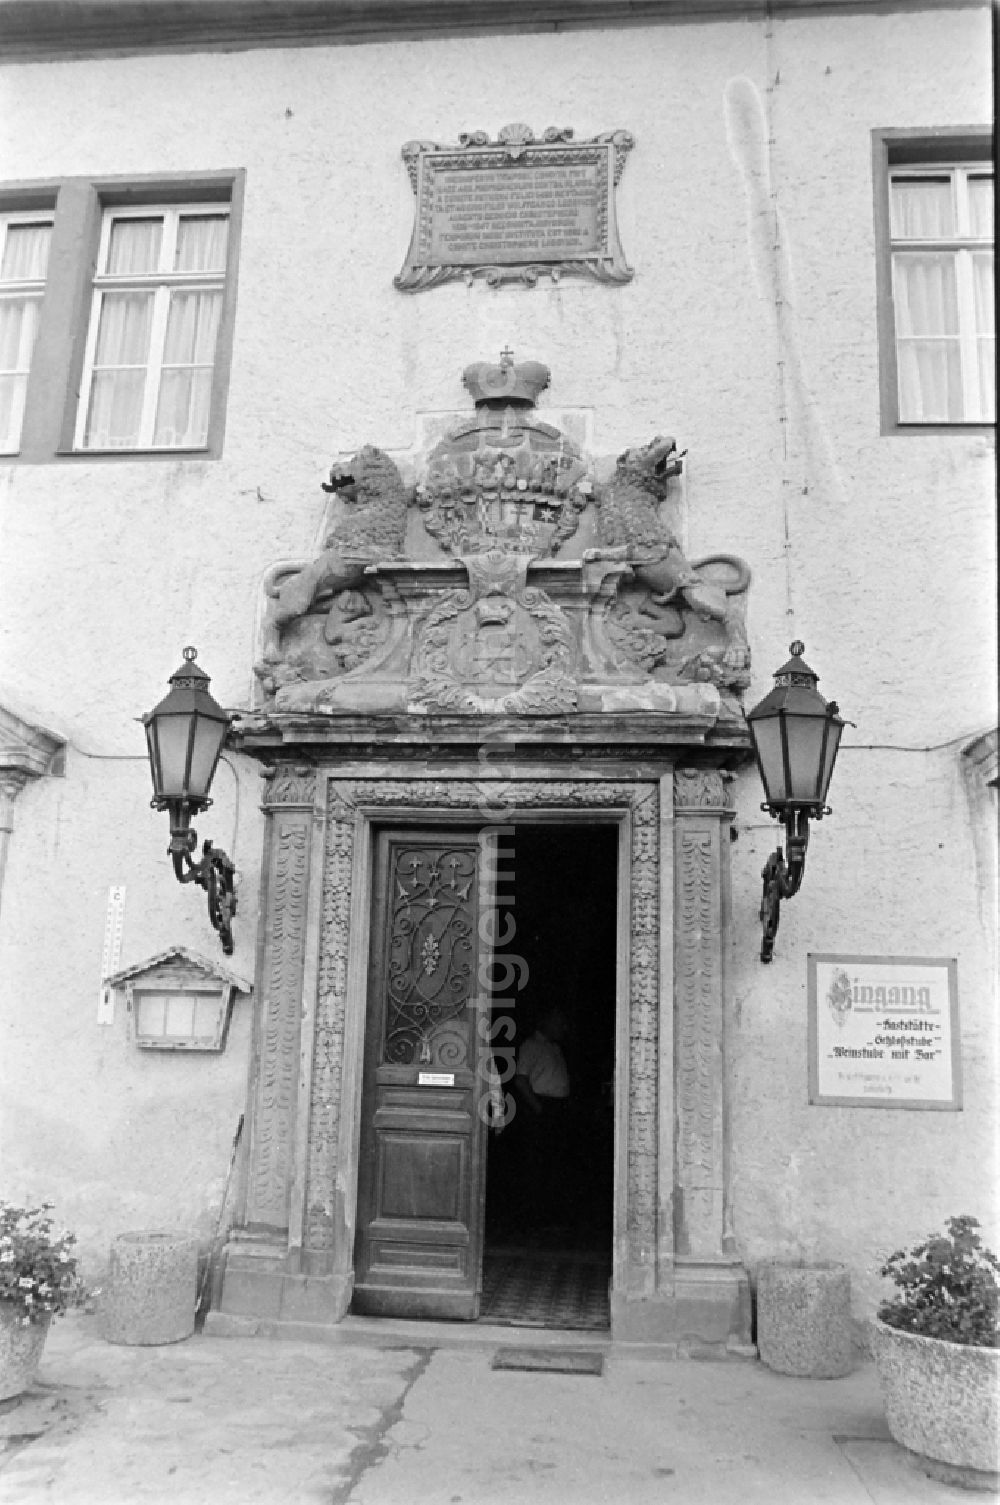 GDR image archive: Stolberg (Harz) - Main portal in the courtyard of the castle FDGB Ferienheim Comenius in Stolberg (Harz) in the federal state of Saxony-Anhalt in the territory of the former GDR, German Democratic Republic. To the right of the portal is a sign with the inscription Entrance to the restaurant Schlossstube Weinstube mit Bar